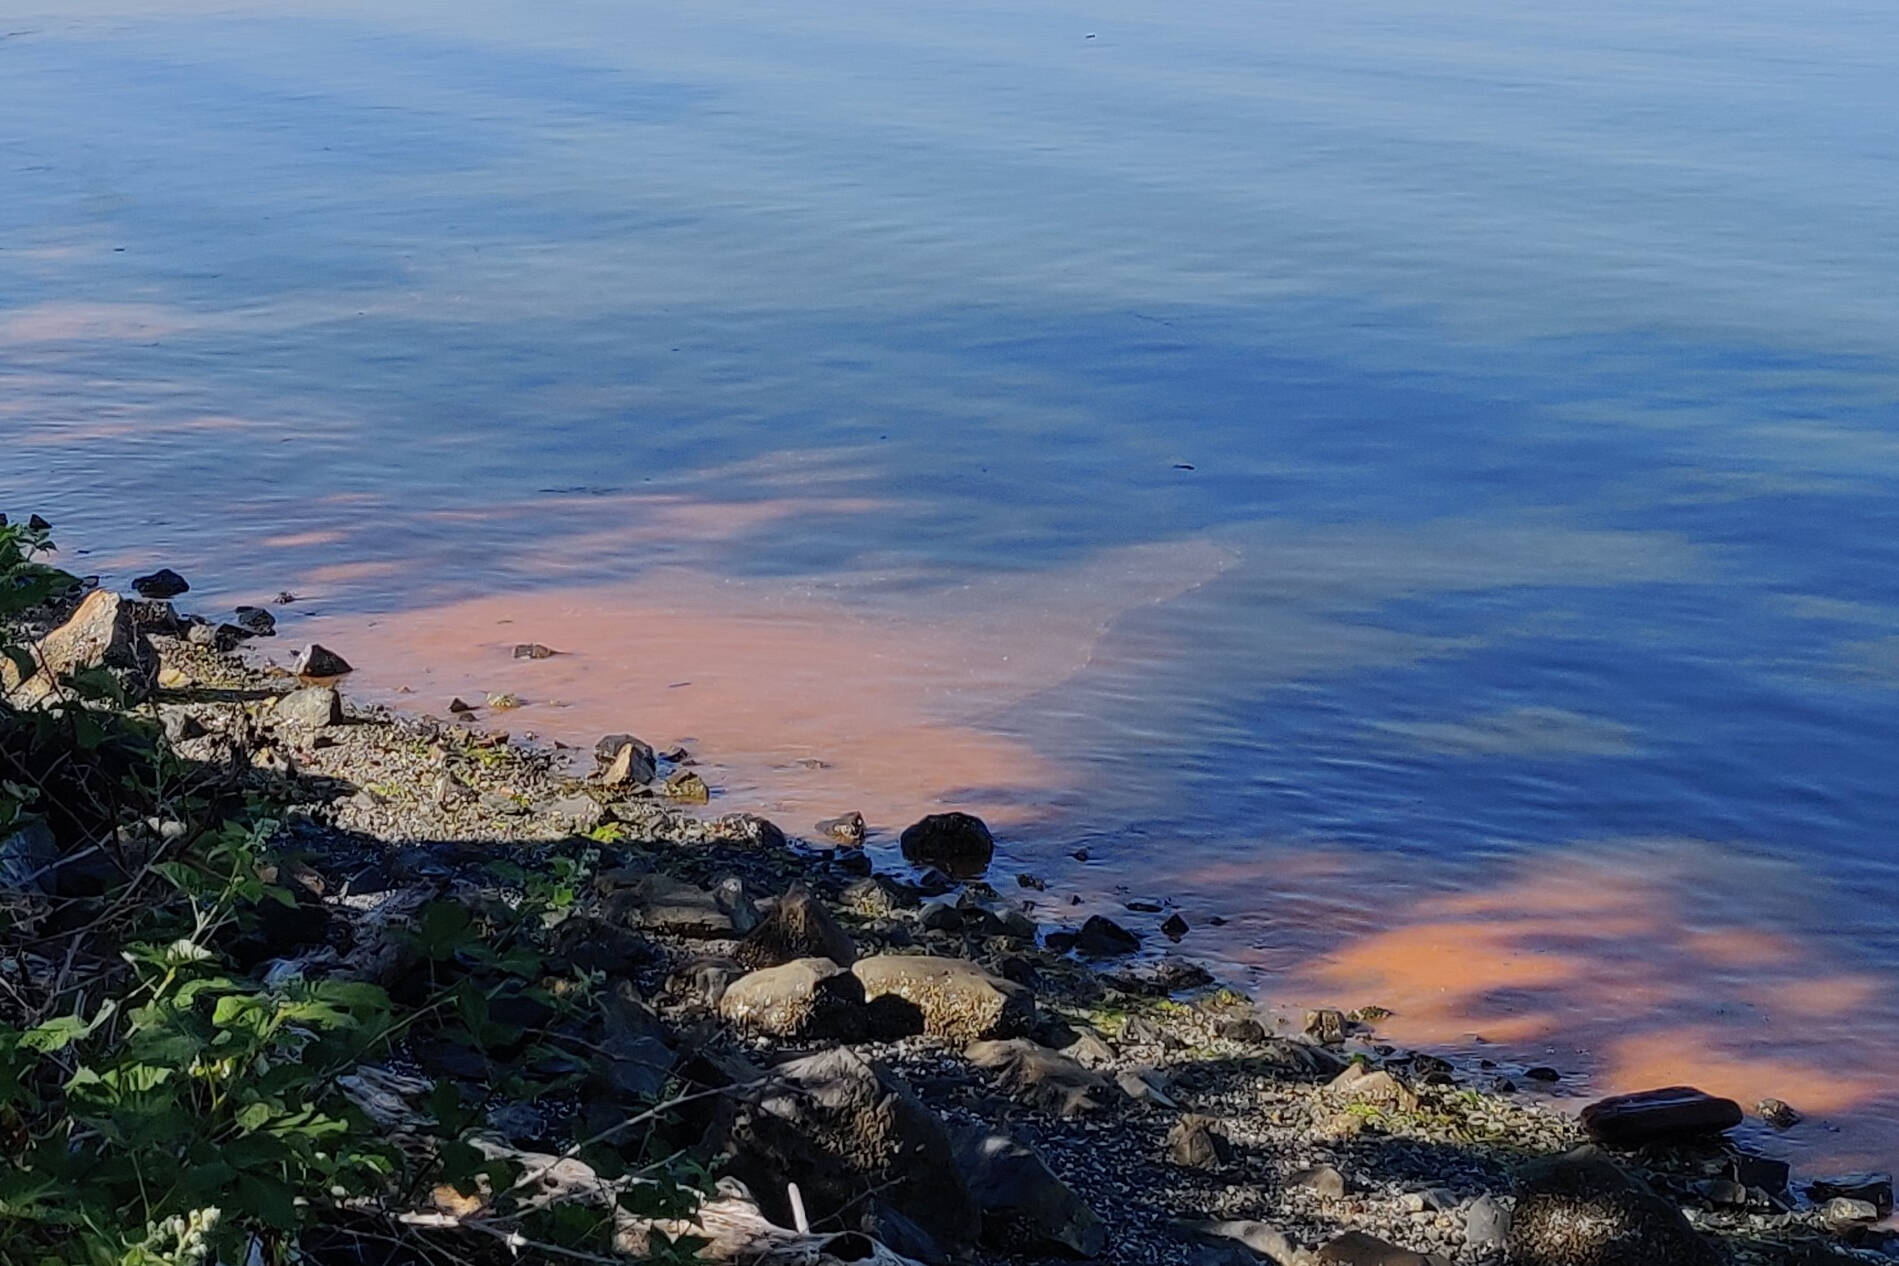 Noctiluca scintillans, also known as red tide algae blooms, were spotted midway along the Patricia Bay beach walking path in North Saanich. (Photo of Courtesy of Frank Towler)